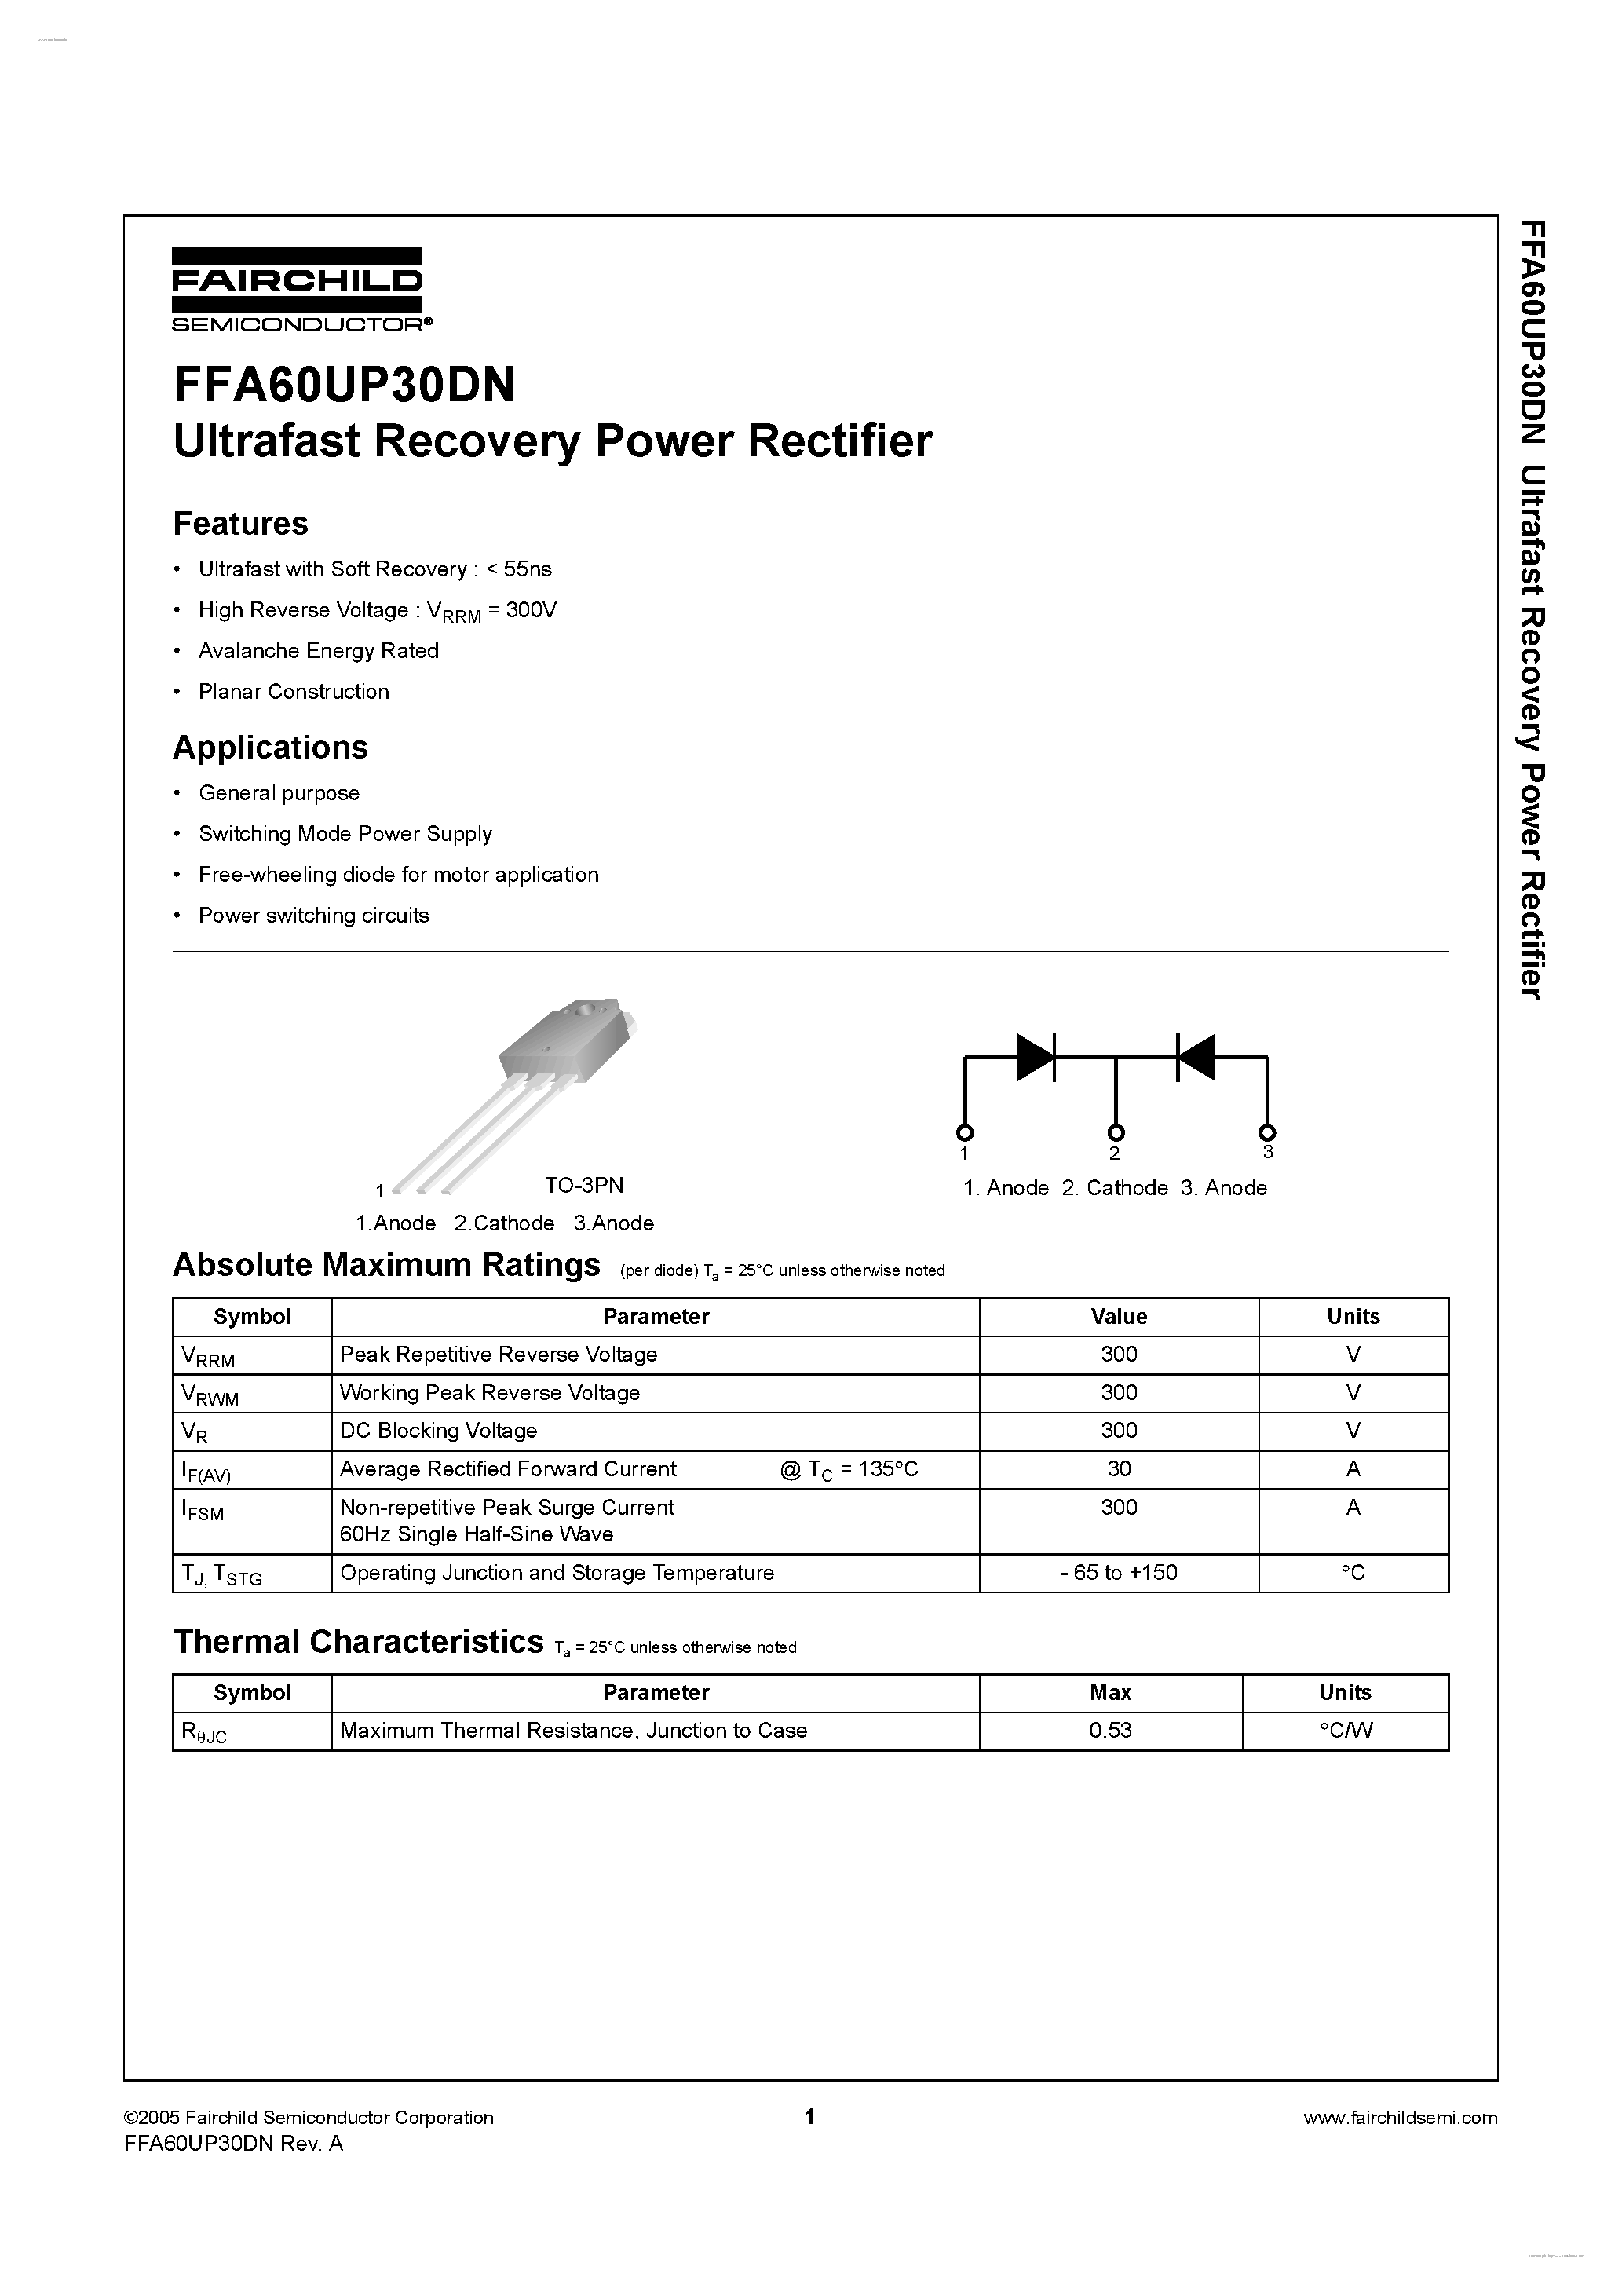 Datasheet FFAF60UP30DN - Ultrafast Recovery Power Rectifier page 1